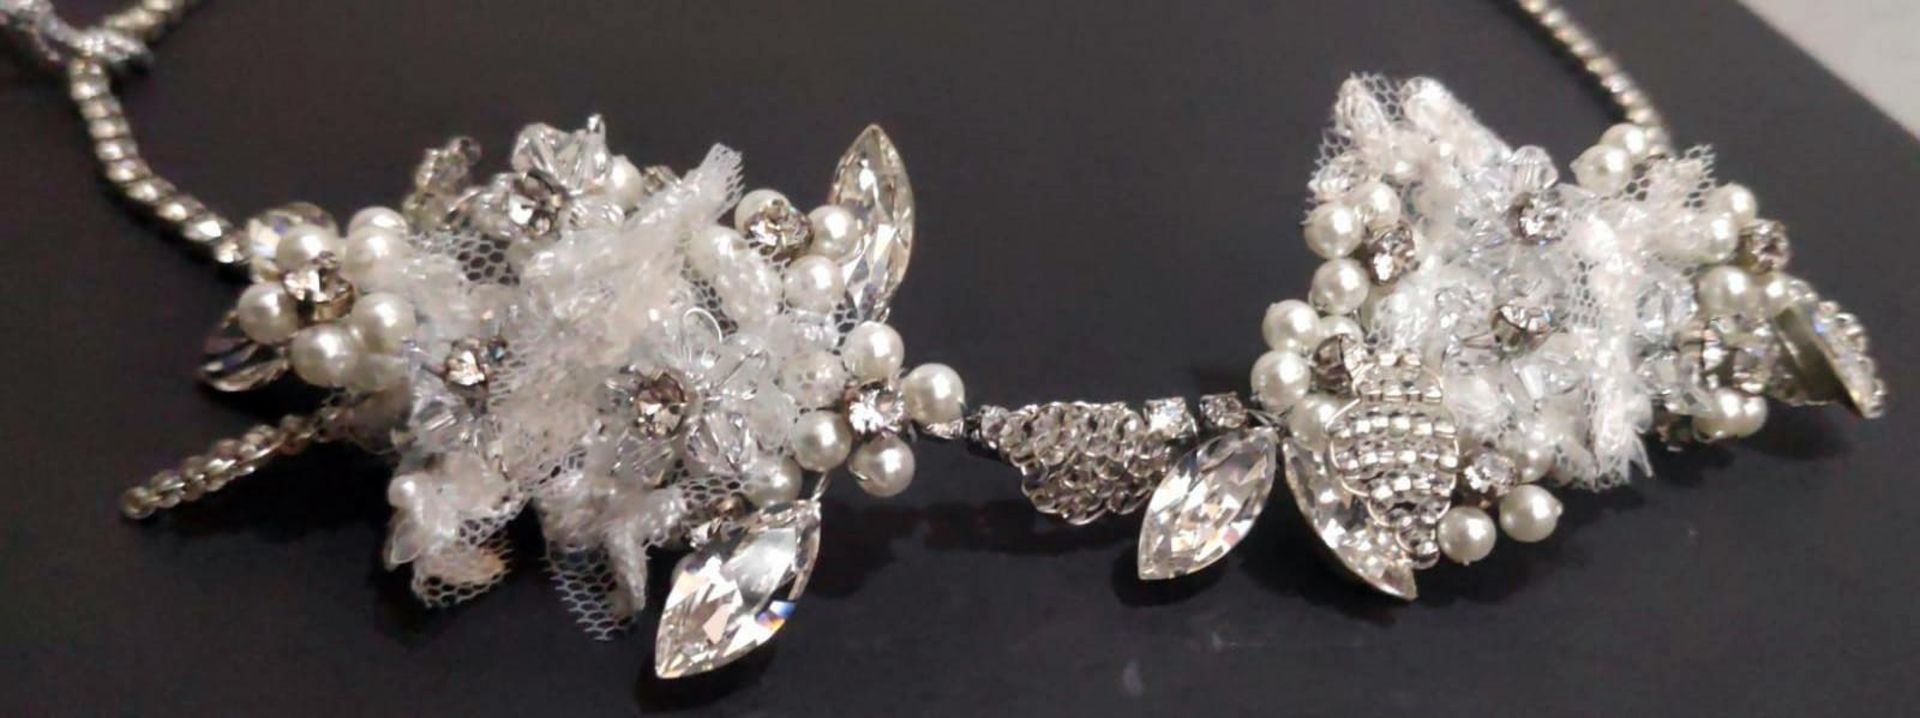 3 x Assorted Items Of Bridal Jewellery By Liza Designs Featuring Swarovski Elements - Image 5 of 9